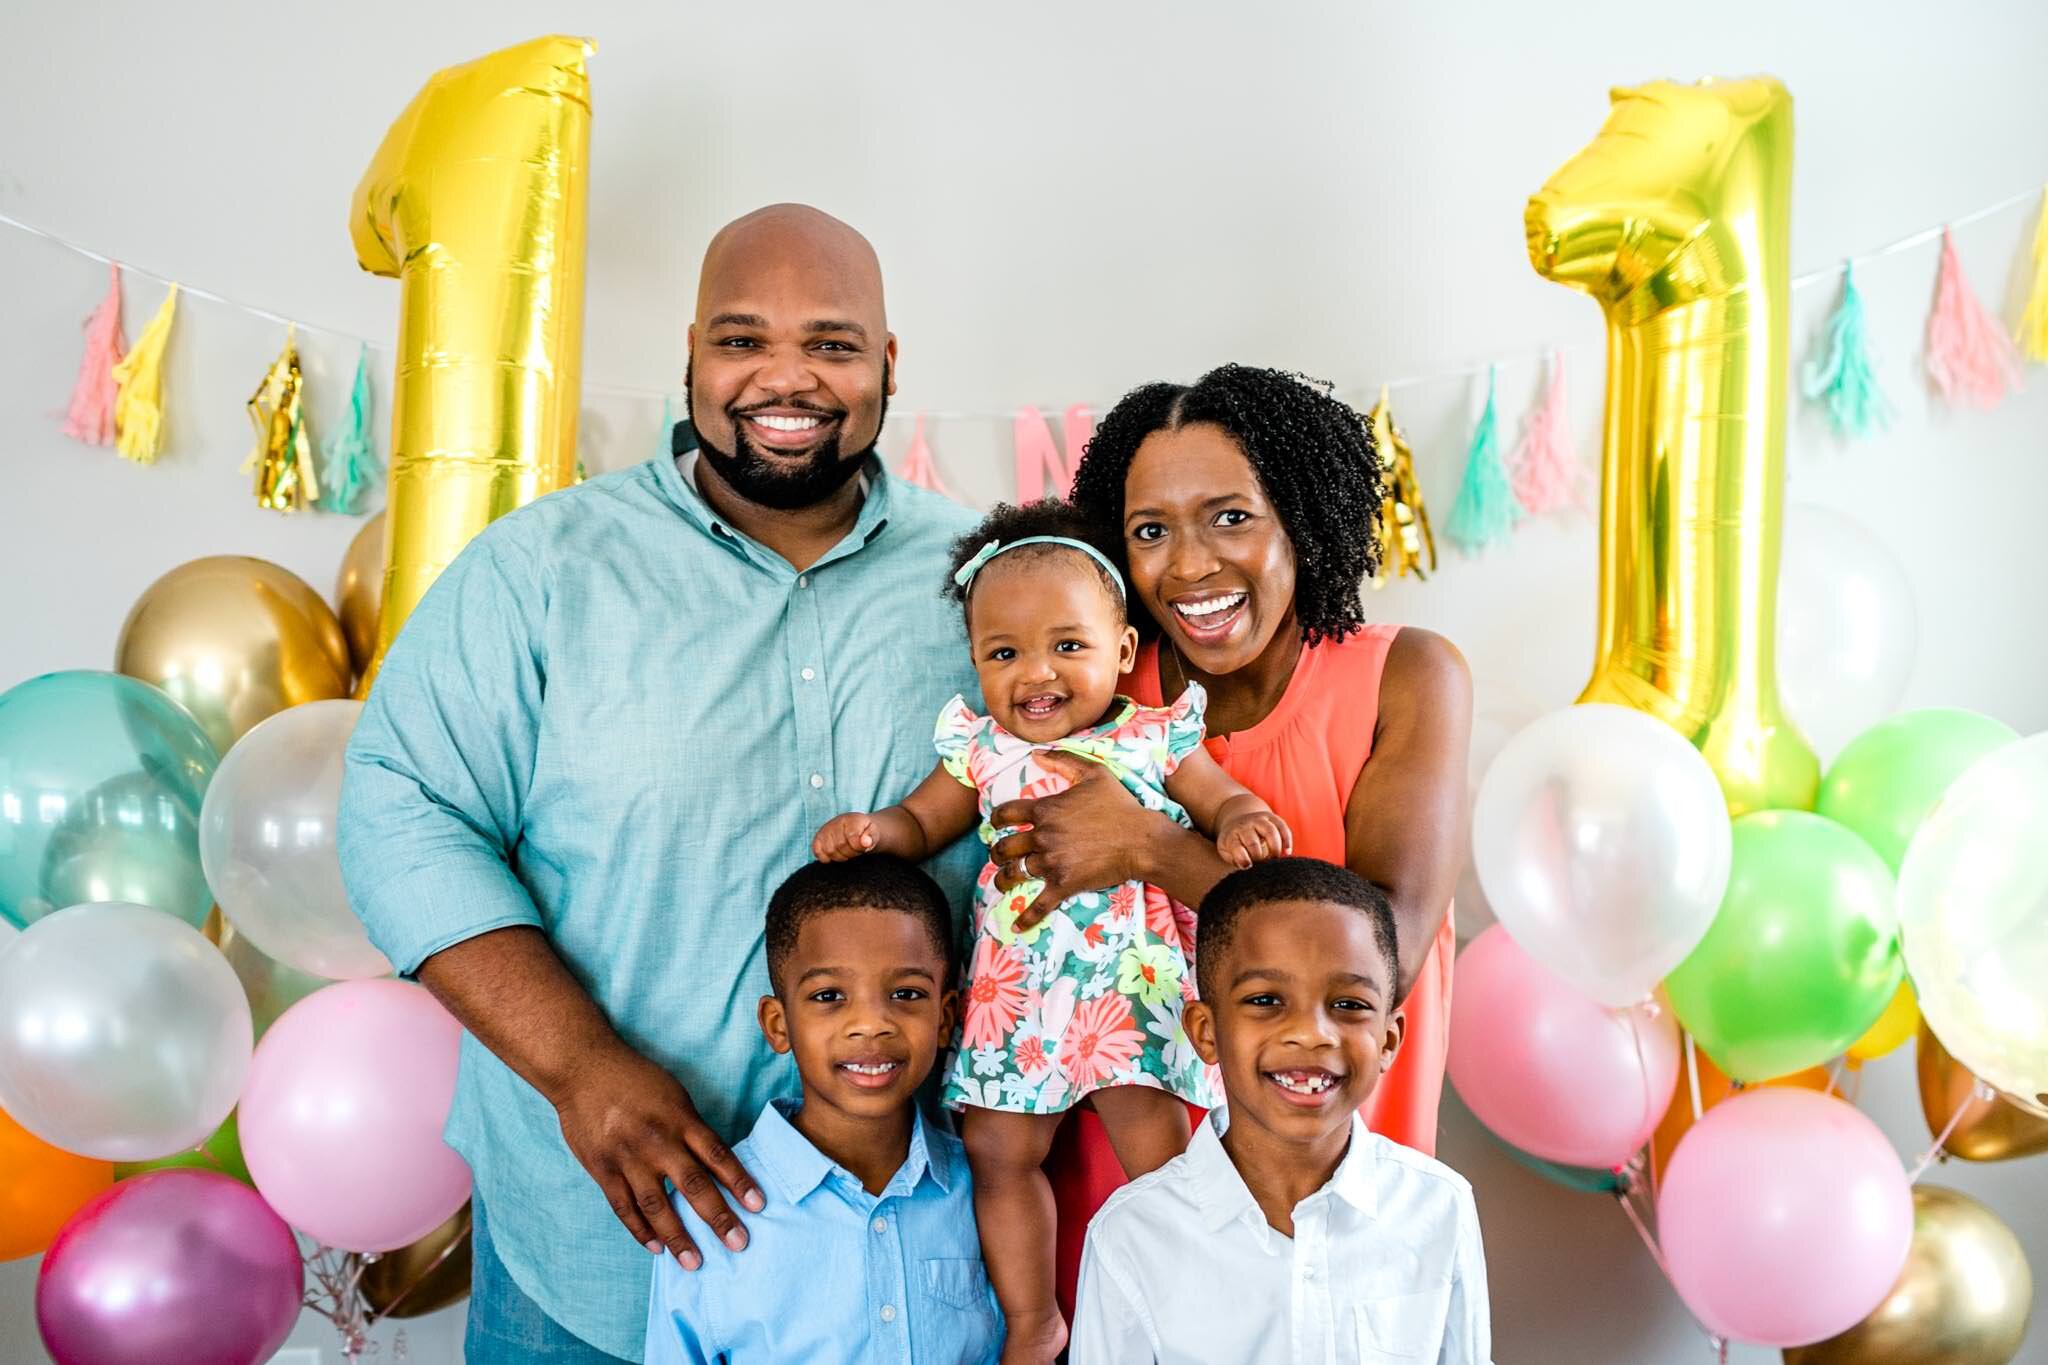 Durham Family Photographer | By G. Lin Photography | Candid family portrait inside home